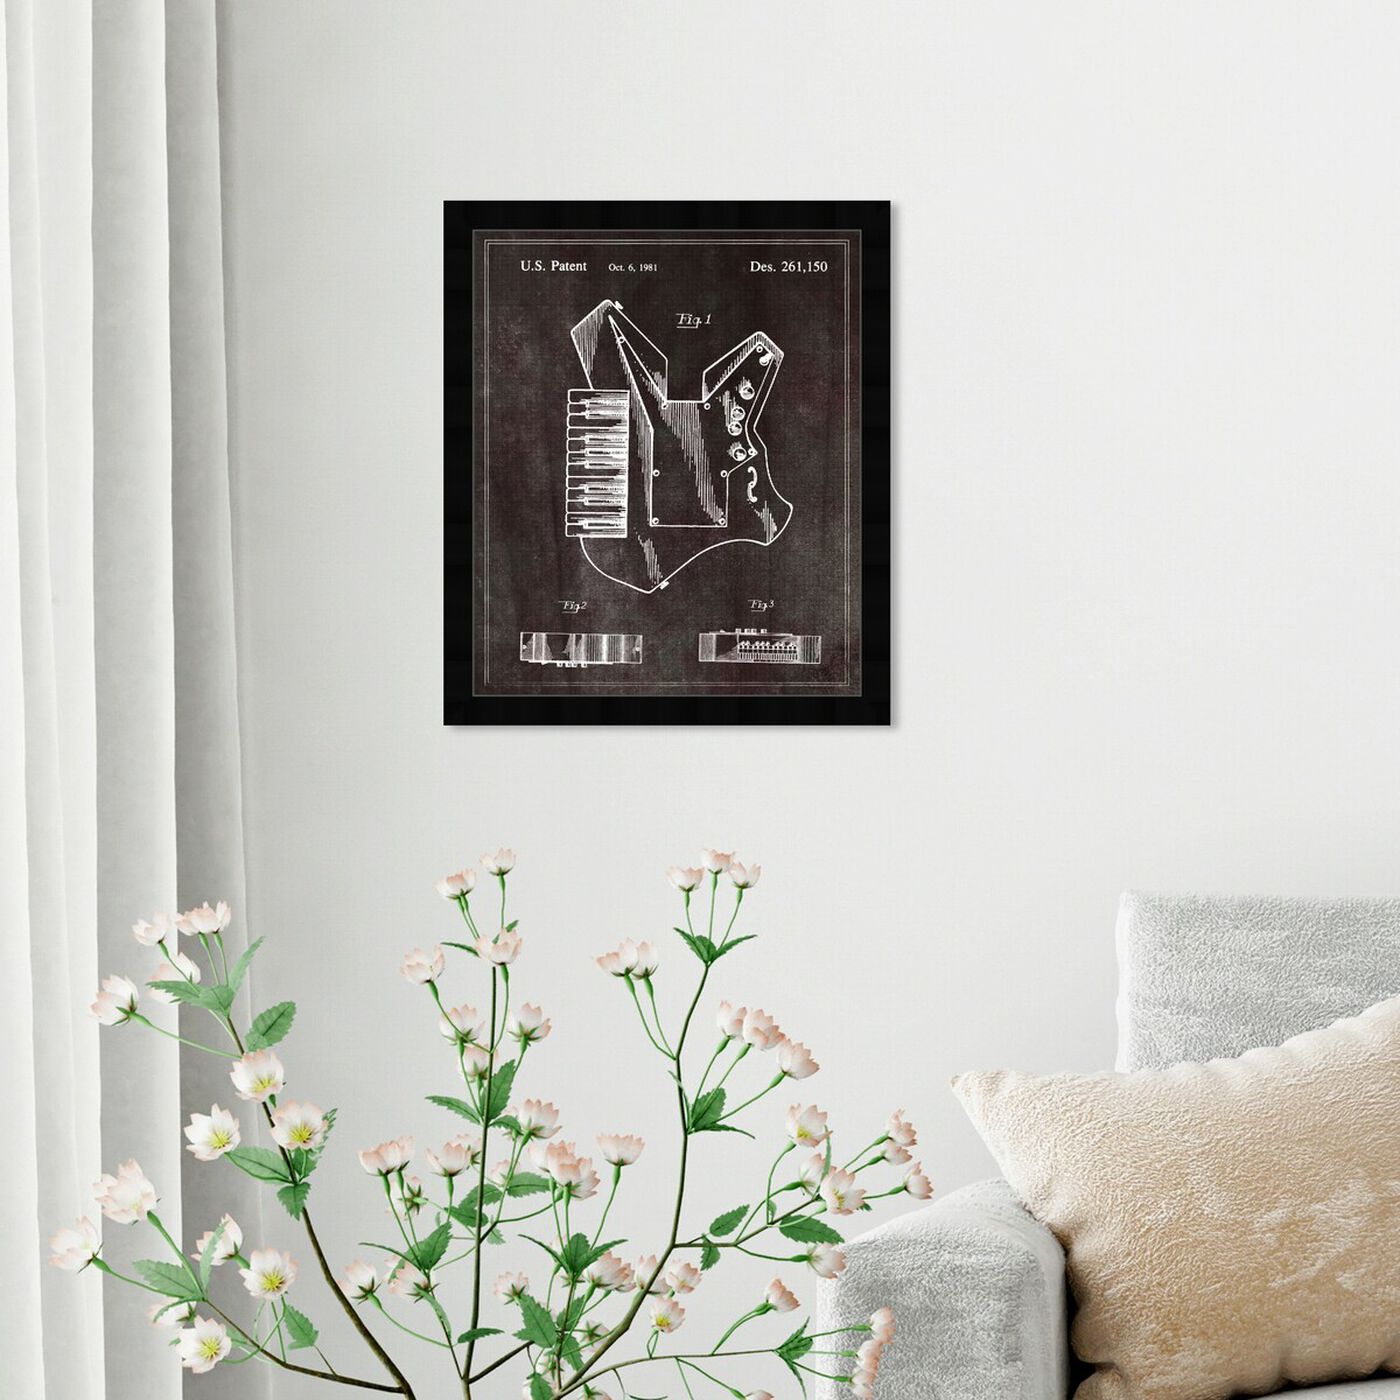 Hanging view of Combined Guitar and Synthesizer 1980 featuring music and dance and music instruments art.